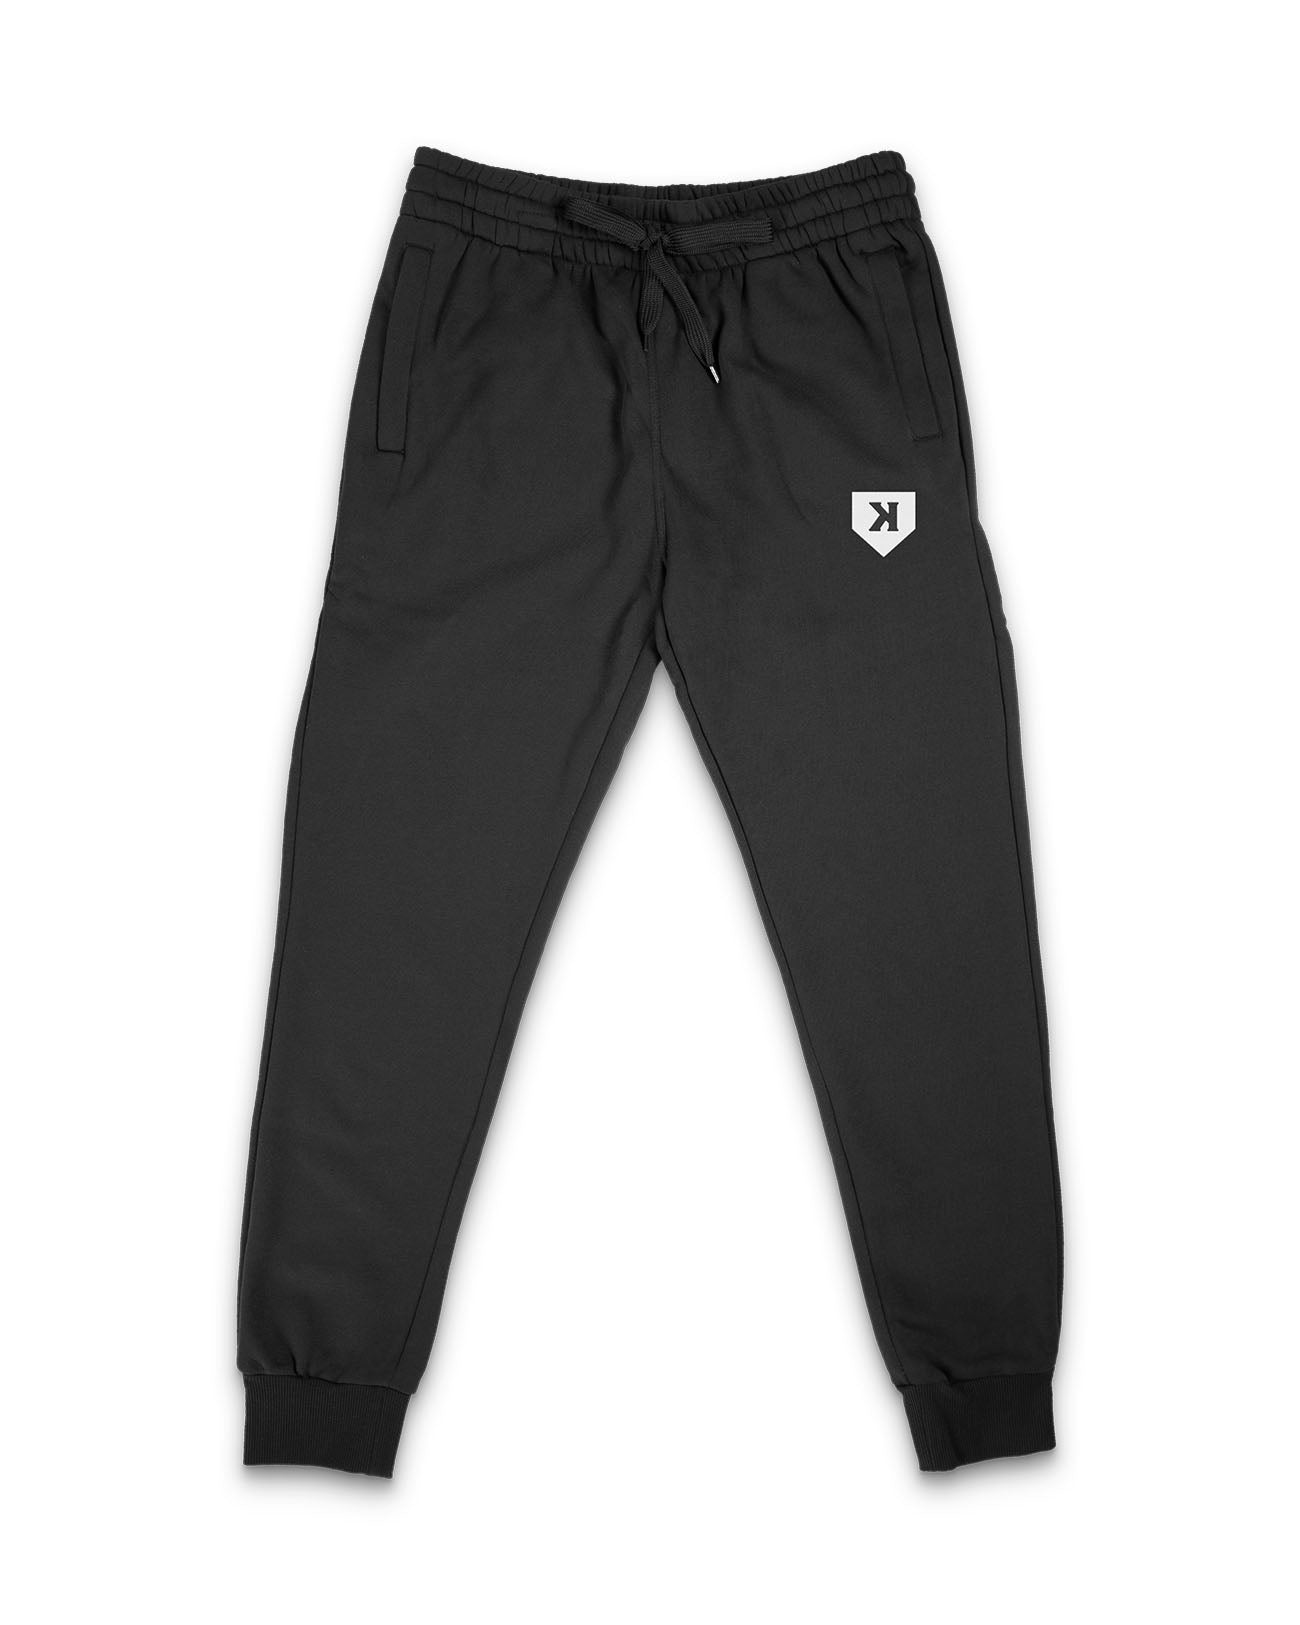 YOUTH Black Performance Joggers